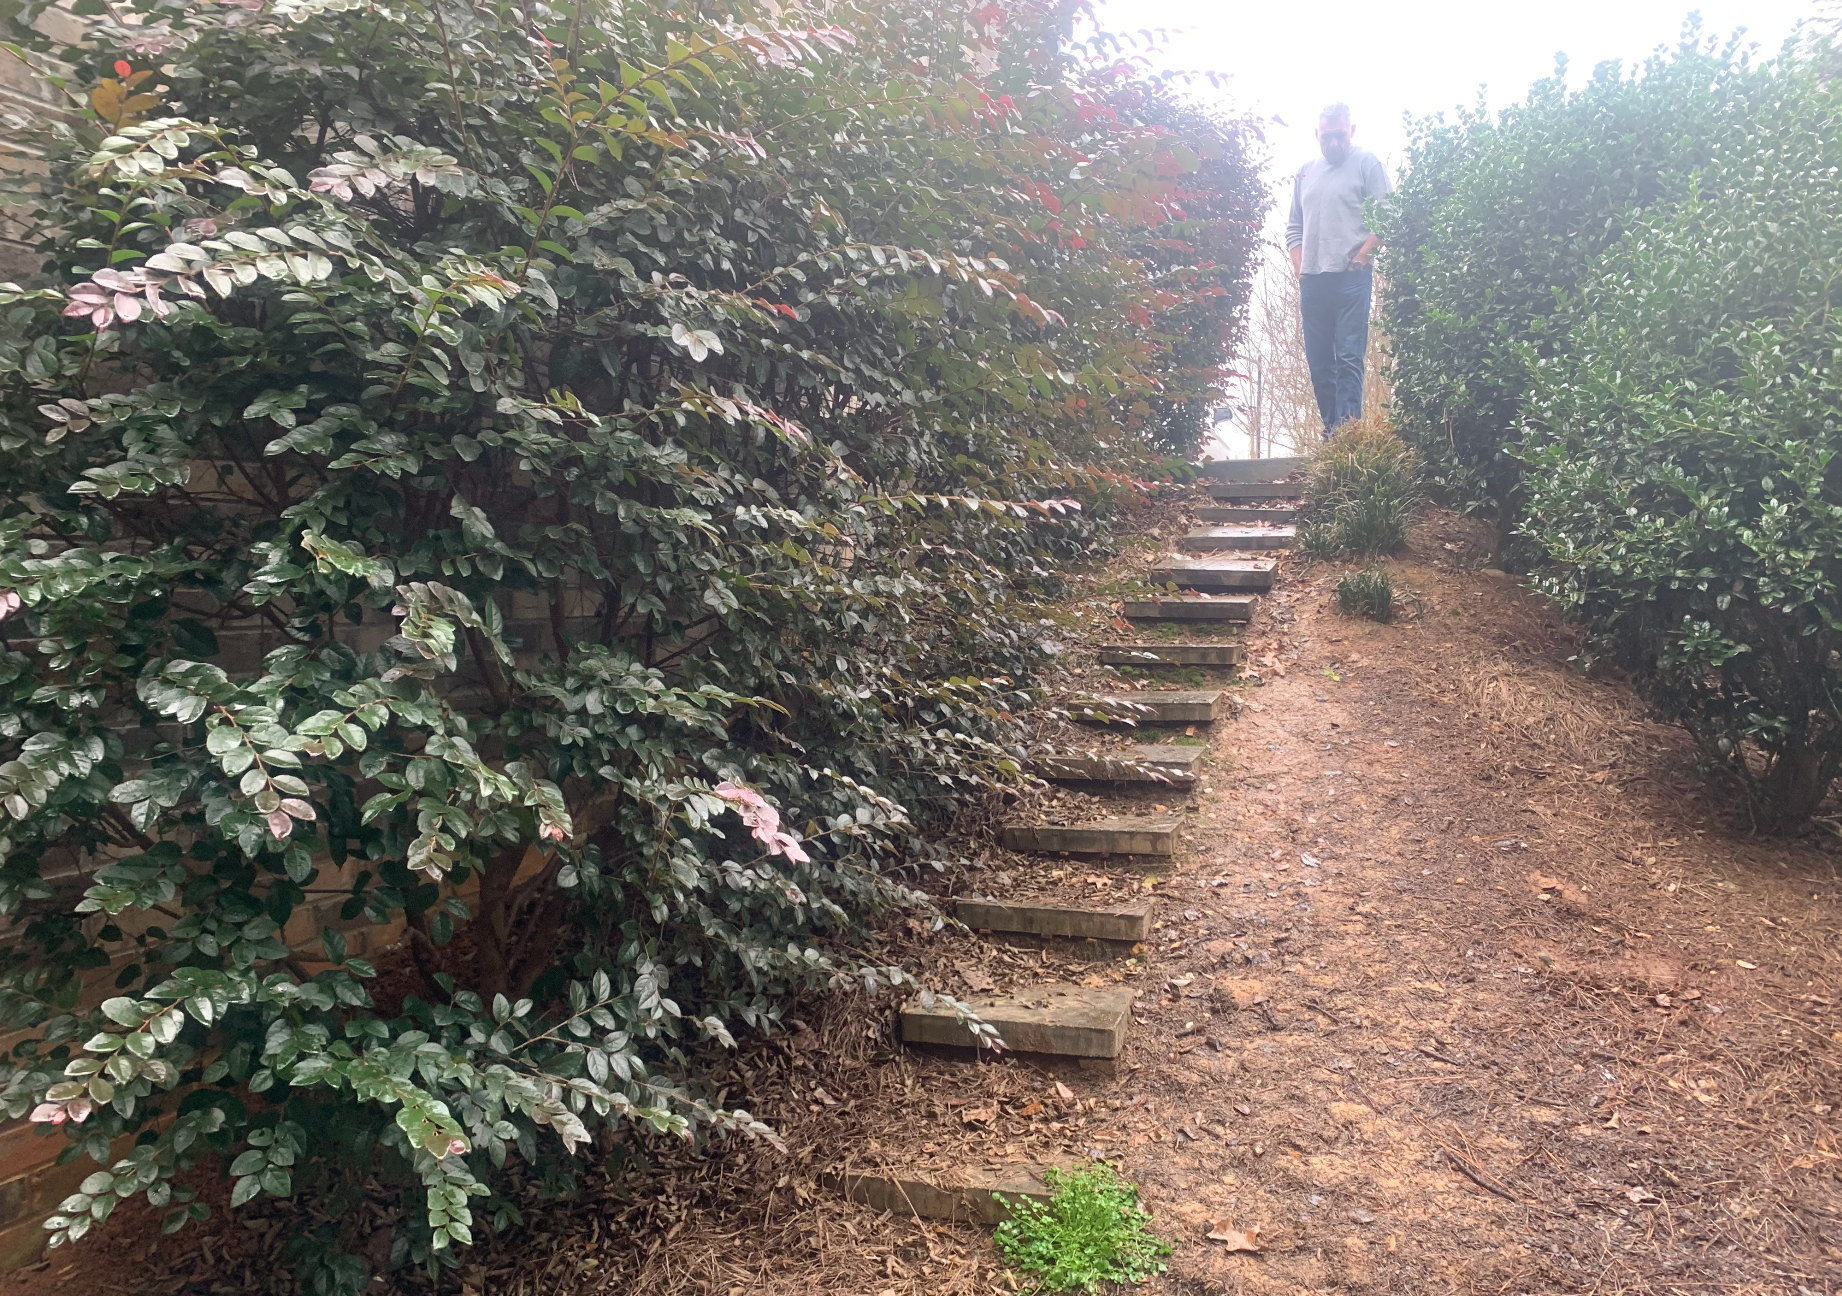 Woodland stairway installation in progress by RC Landscapes.